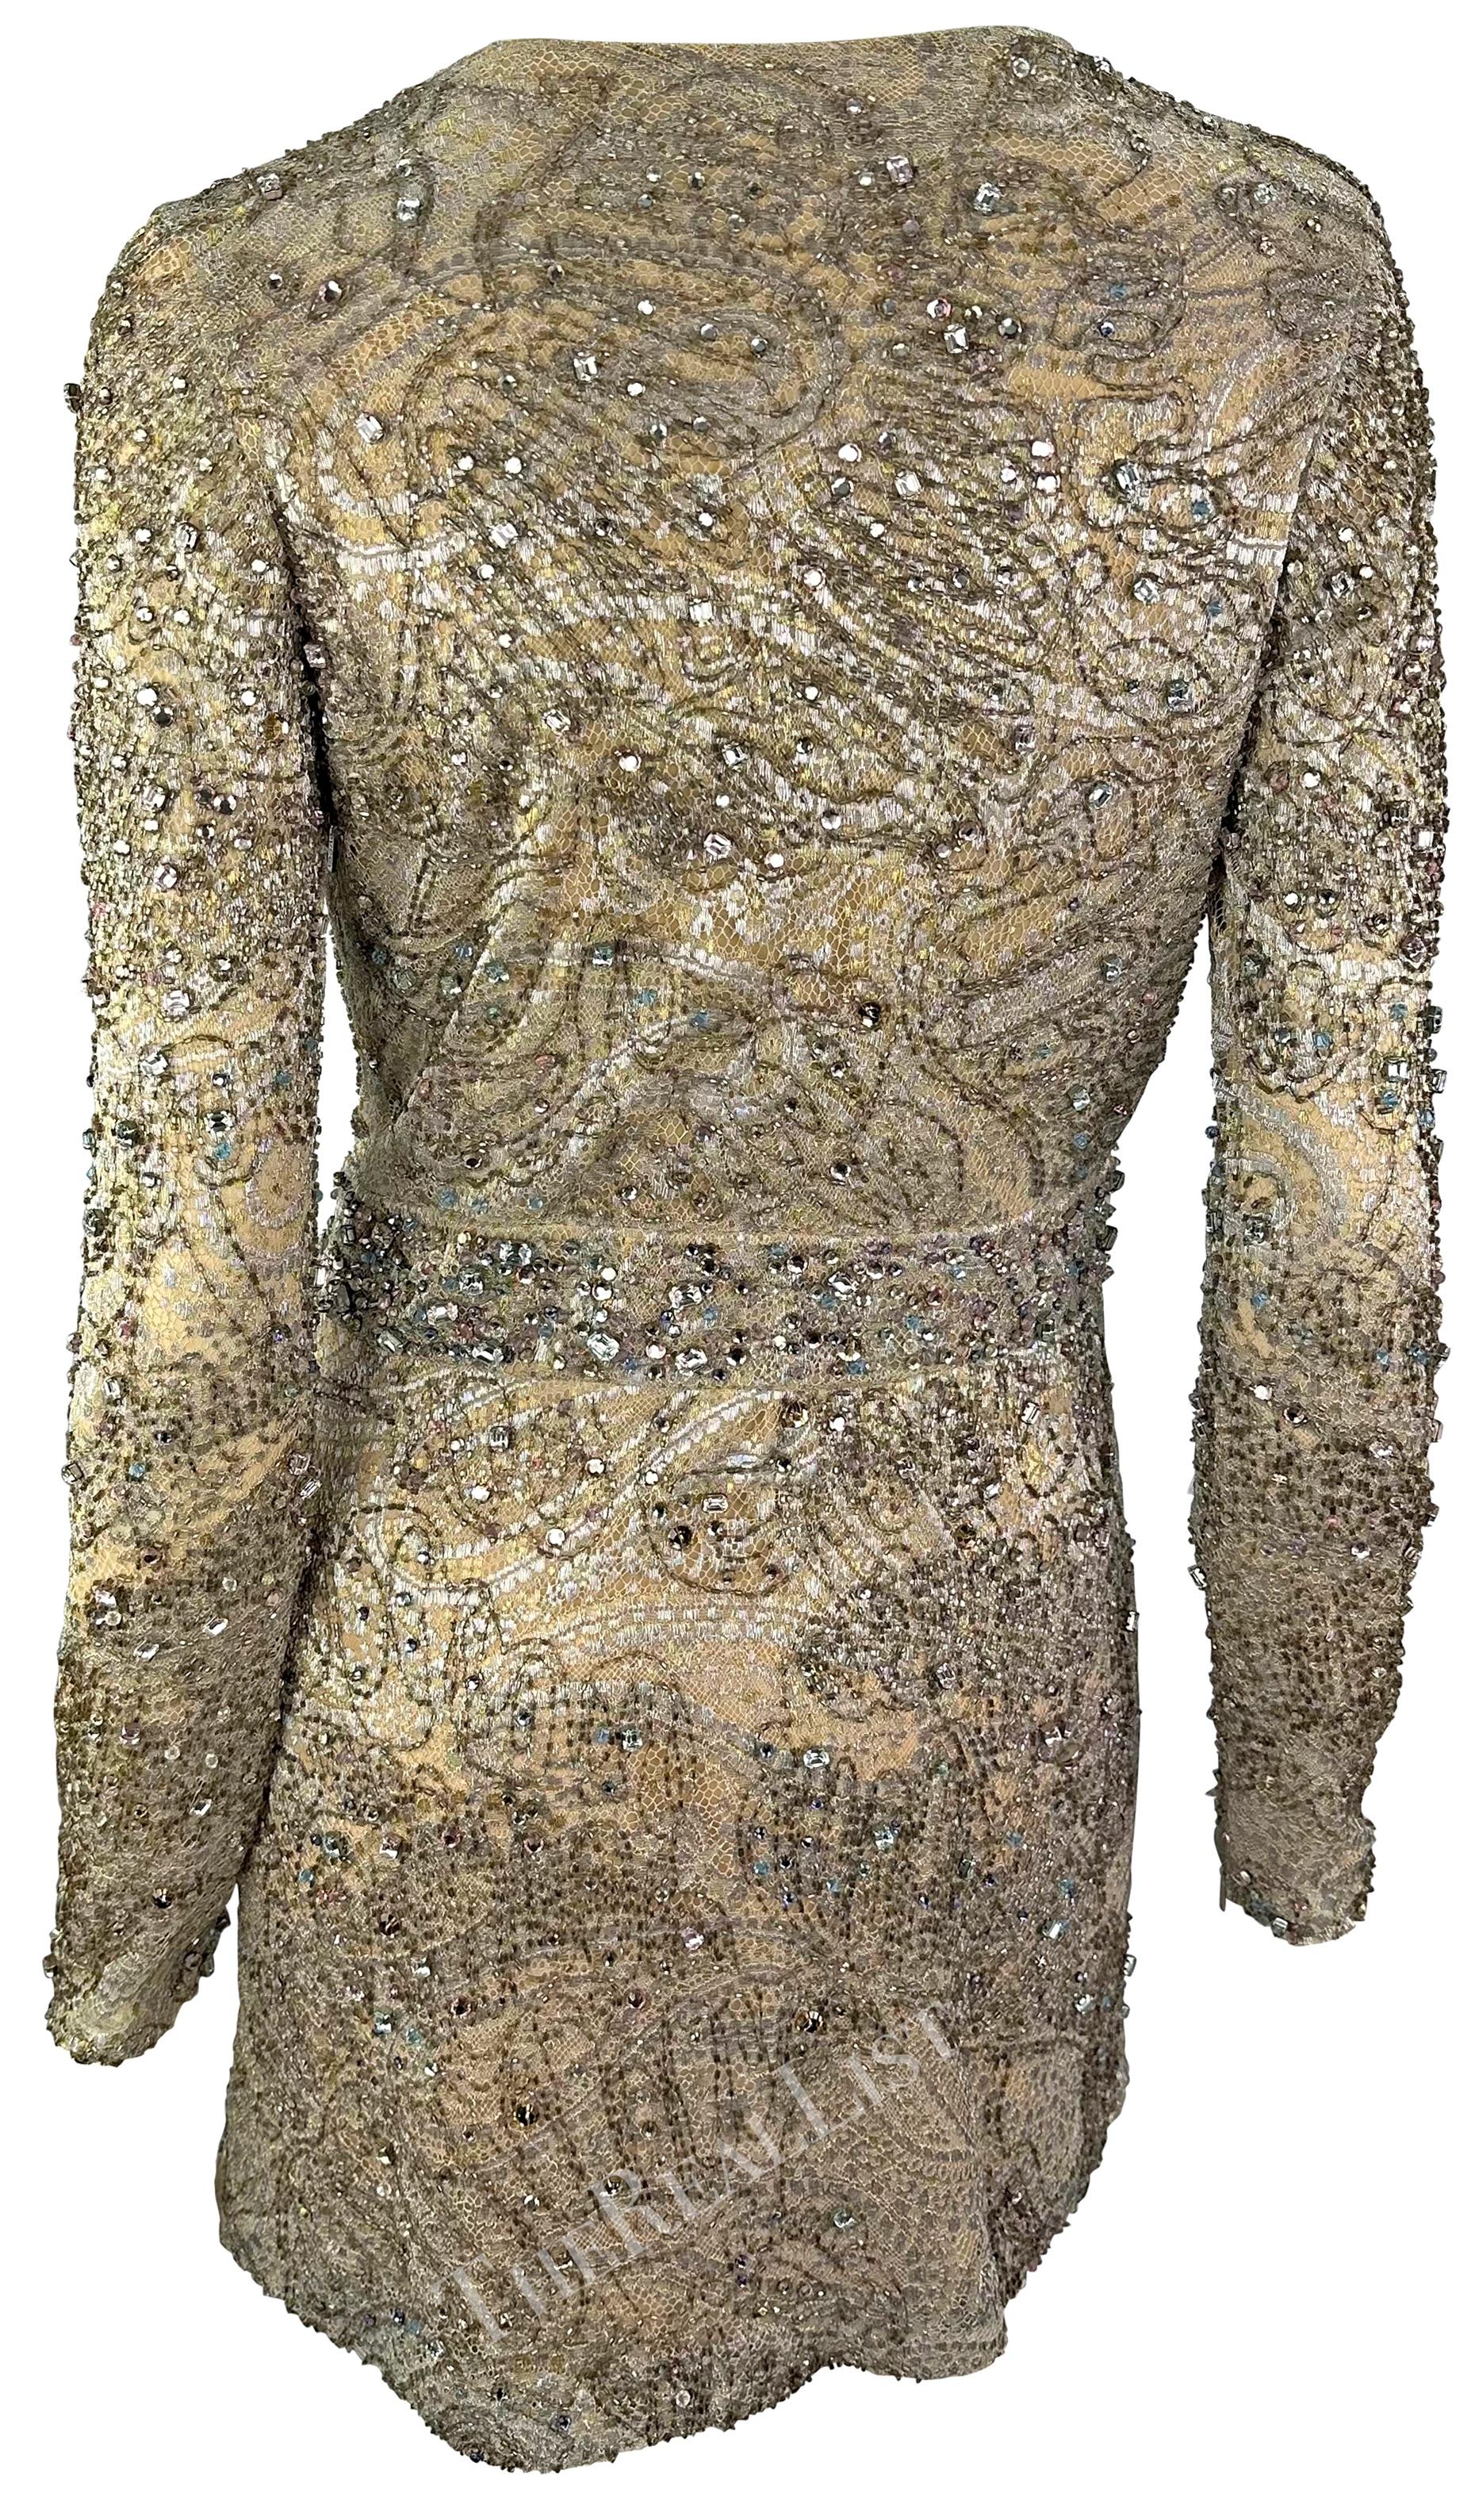 F/W 2000 Gucci by Tom Ford Rhinestone Beaded Plunge Silver Beige Lace Mini Dress For Sale 5